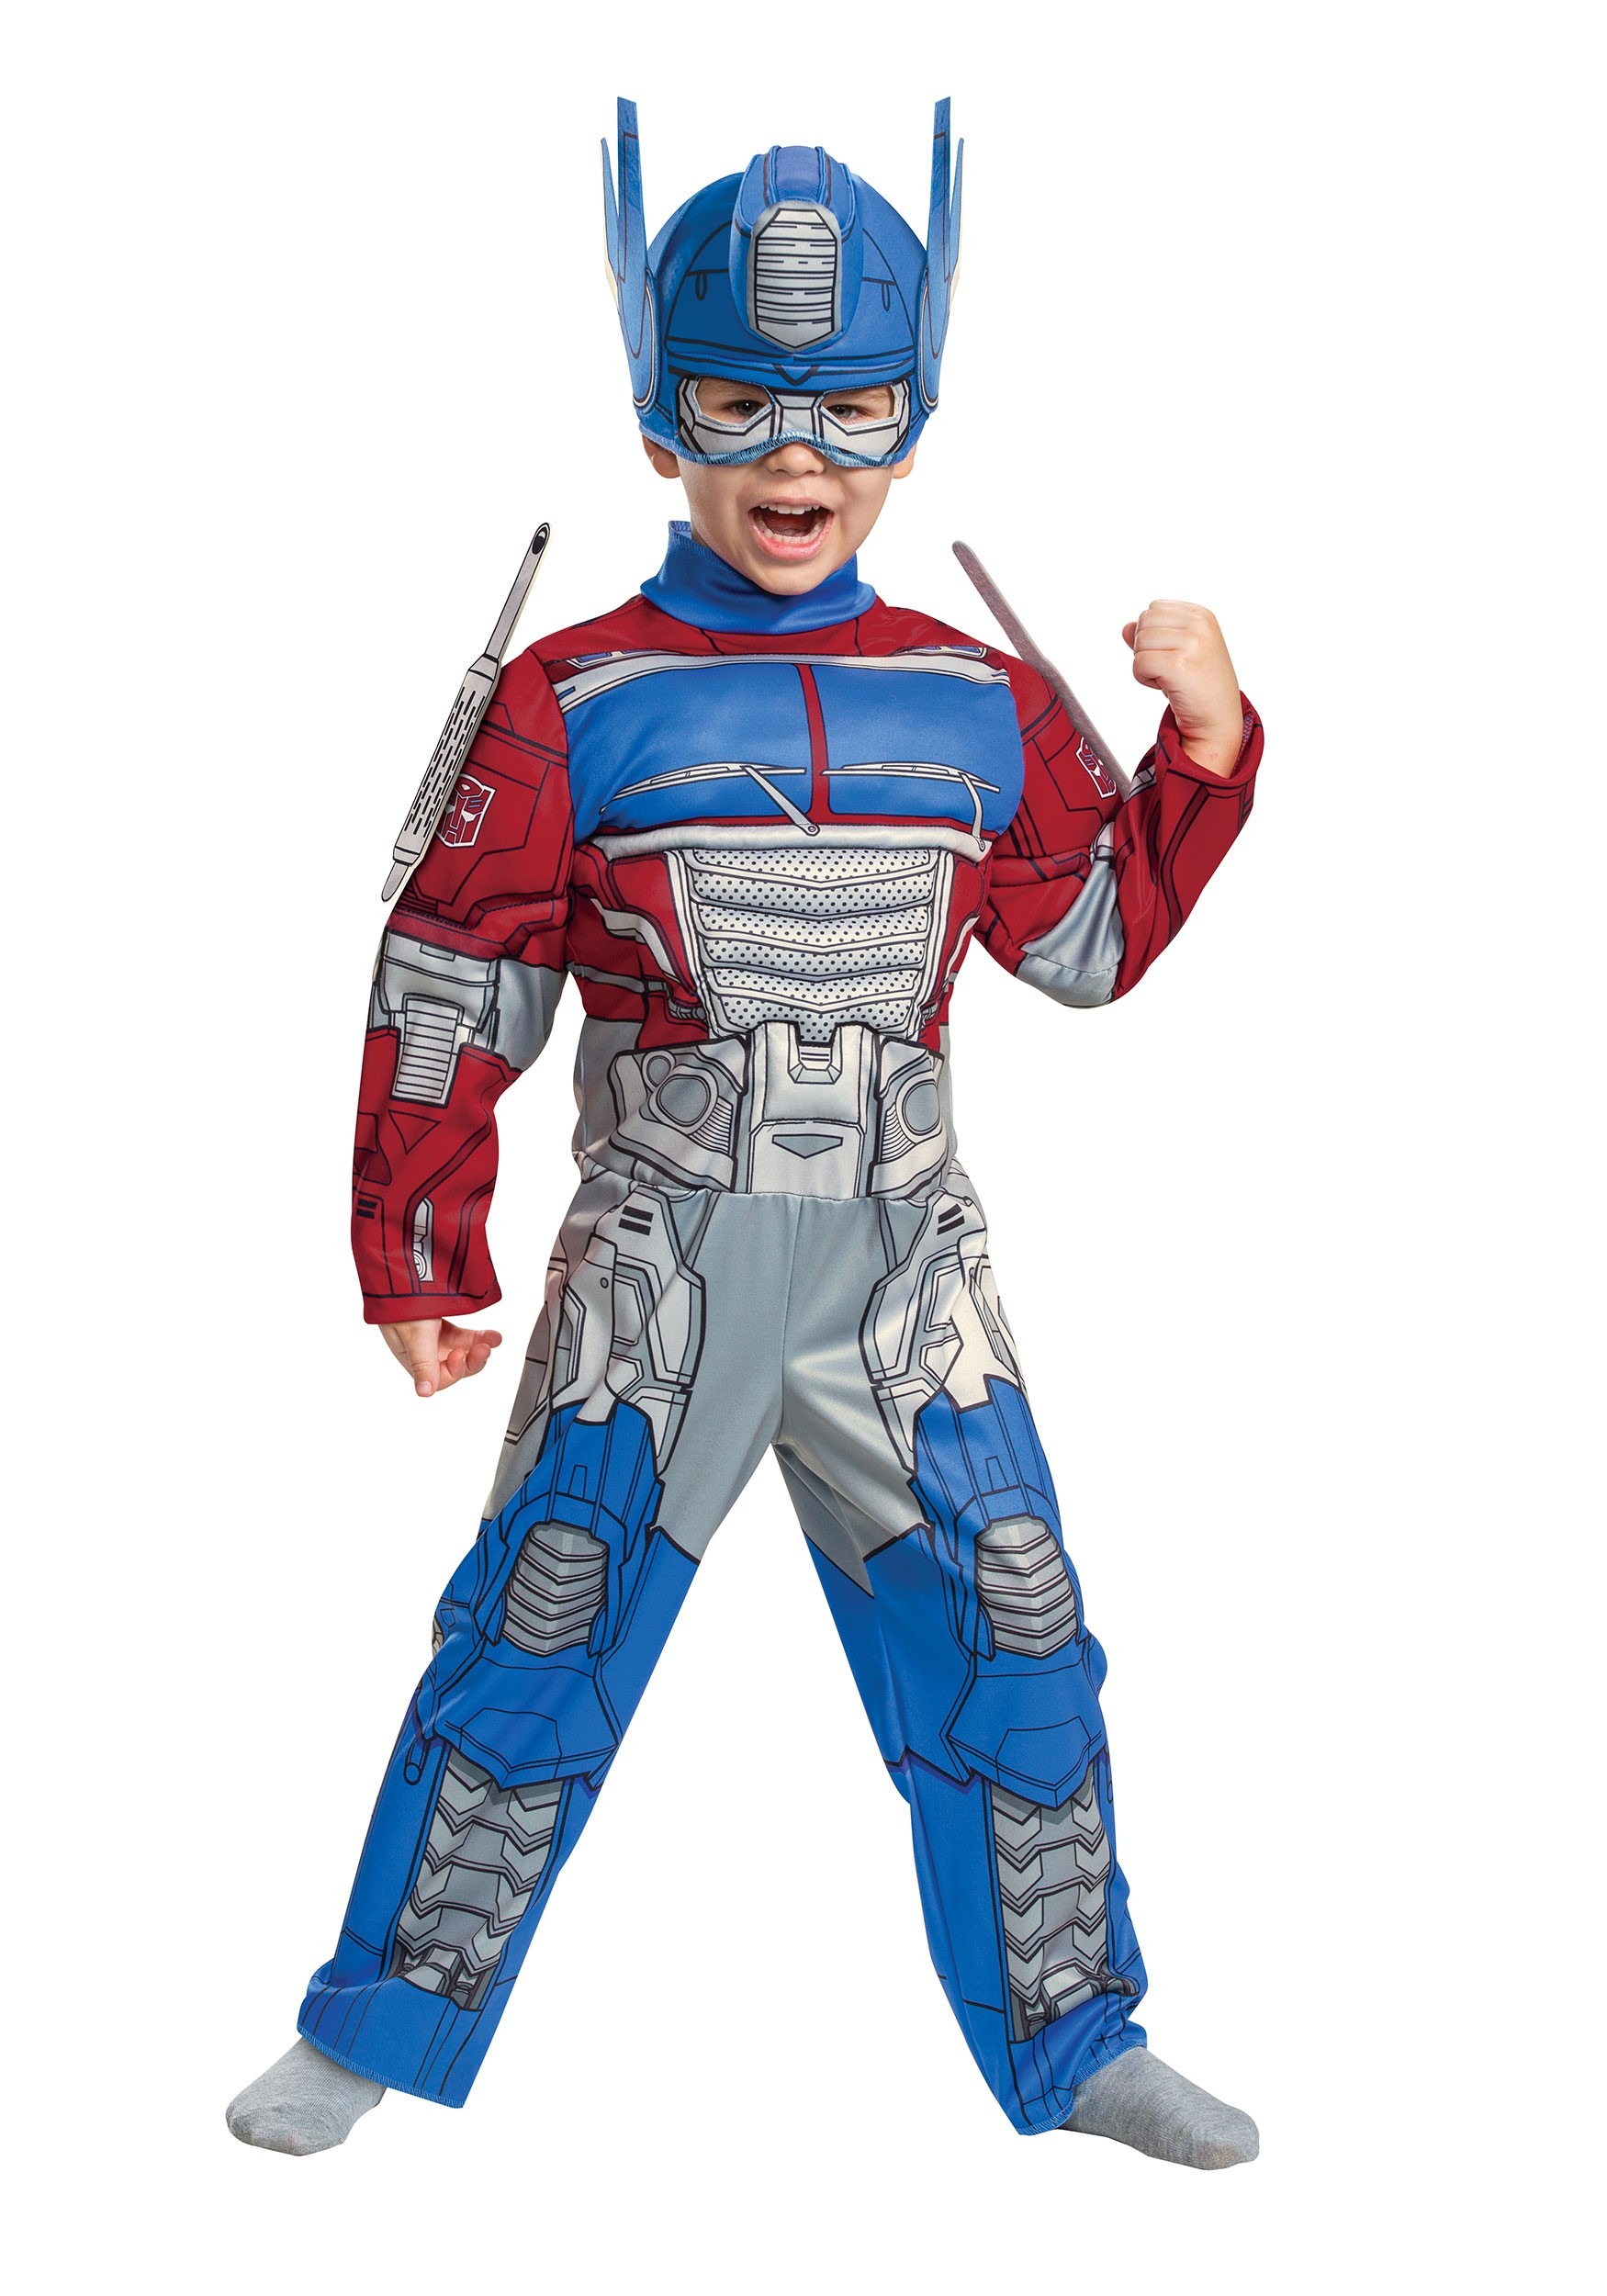 Transformers Optimus Prime Costume For Toddlers